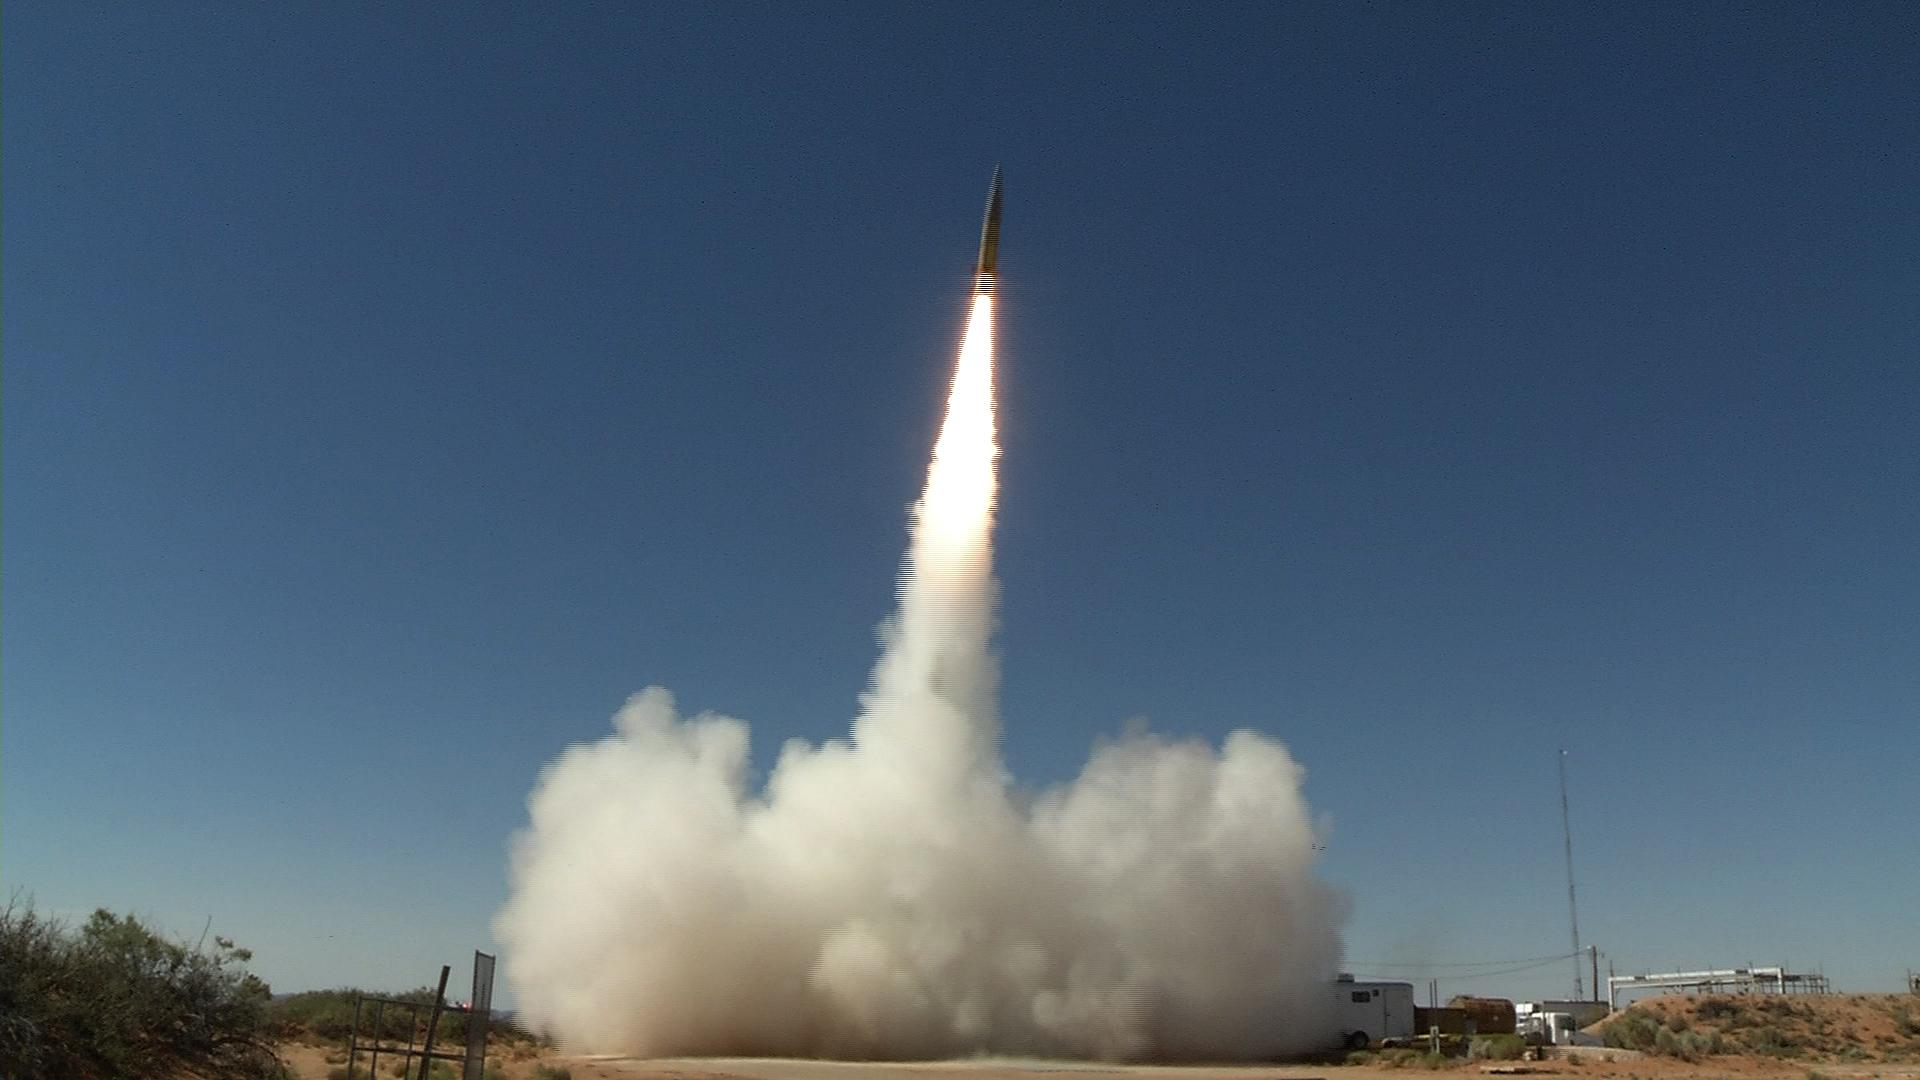 A Sabre short-range ballistic missile launches in June 2017 at White Sands Missile Range, New Mexico, for a test of the Patriot Advanced Capability-3 (PAC-3) Missile Segment Enhancement, an advanced missile defense system. Hypersonic missiles might be able to penetrate PAC-3 and similar systems. (U.S. Army photo by U.S. Army Space and Missile Defense Command/Army Forces Strategic Command)